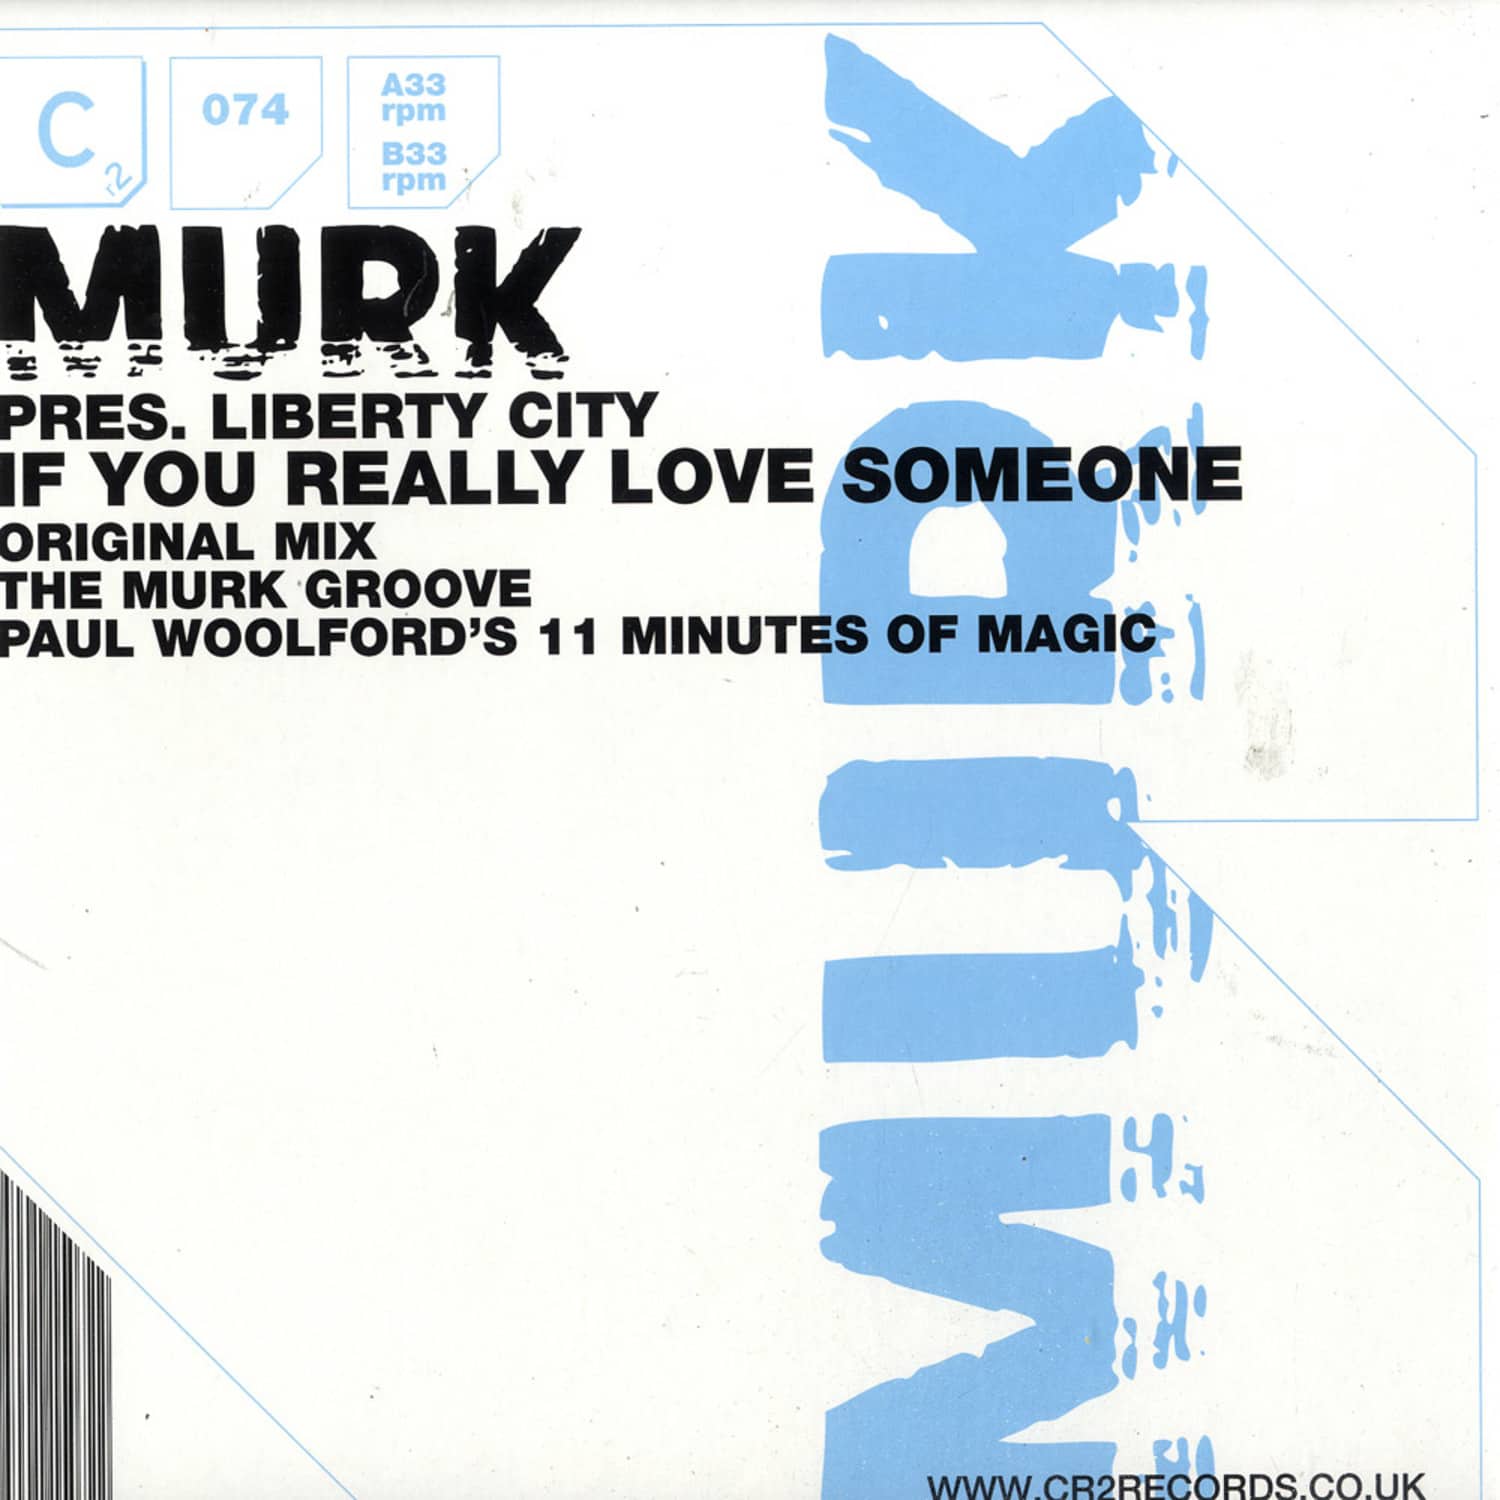 Murk pres. Liberty City - IF YOU REALLY LOVE SOMEONE